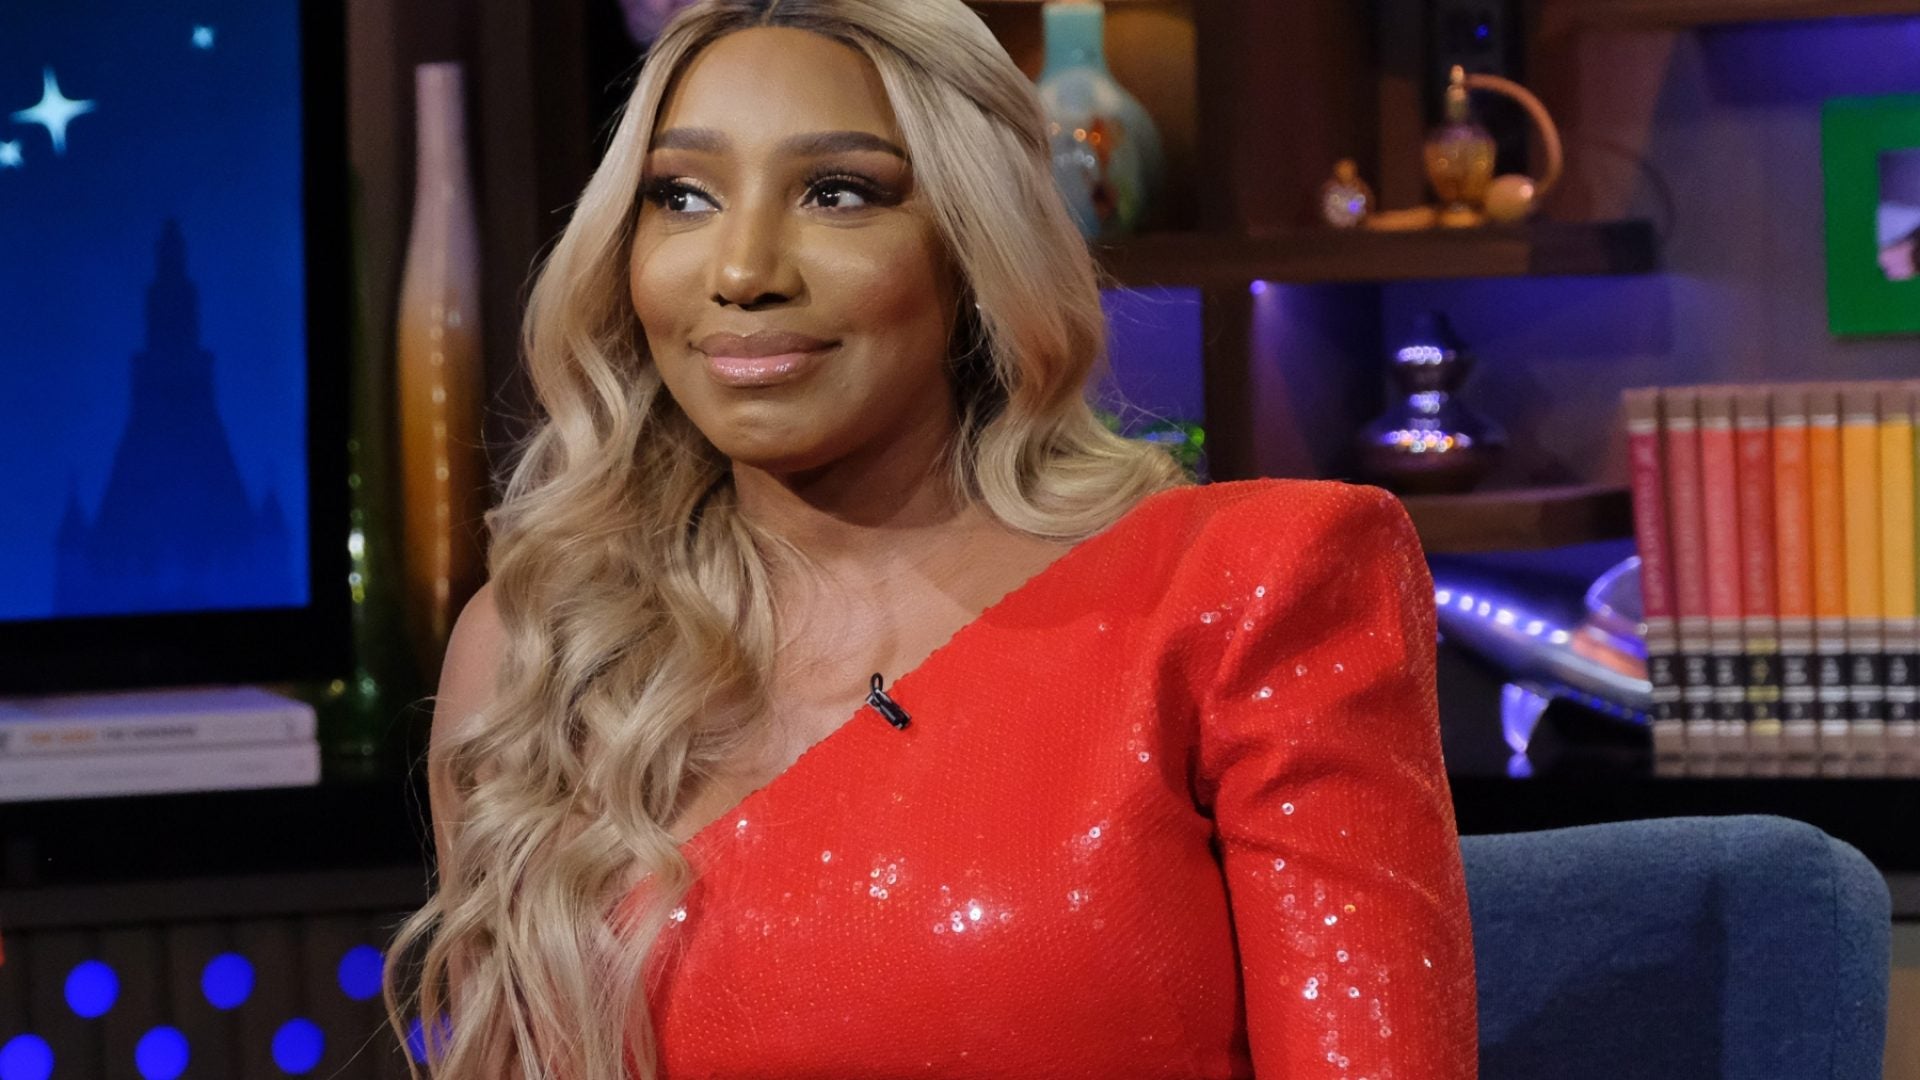 NeNe Leakes On Adjusting To 'New Normal' After Passing Of Husband Gregg: 'I Have Good Days And Bad Days'